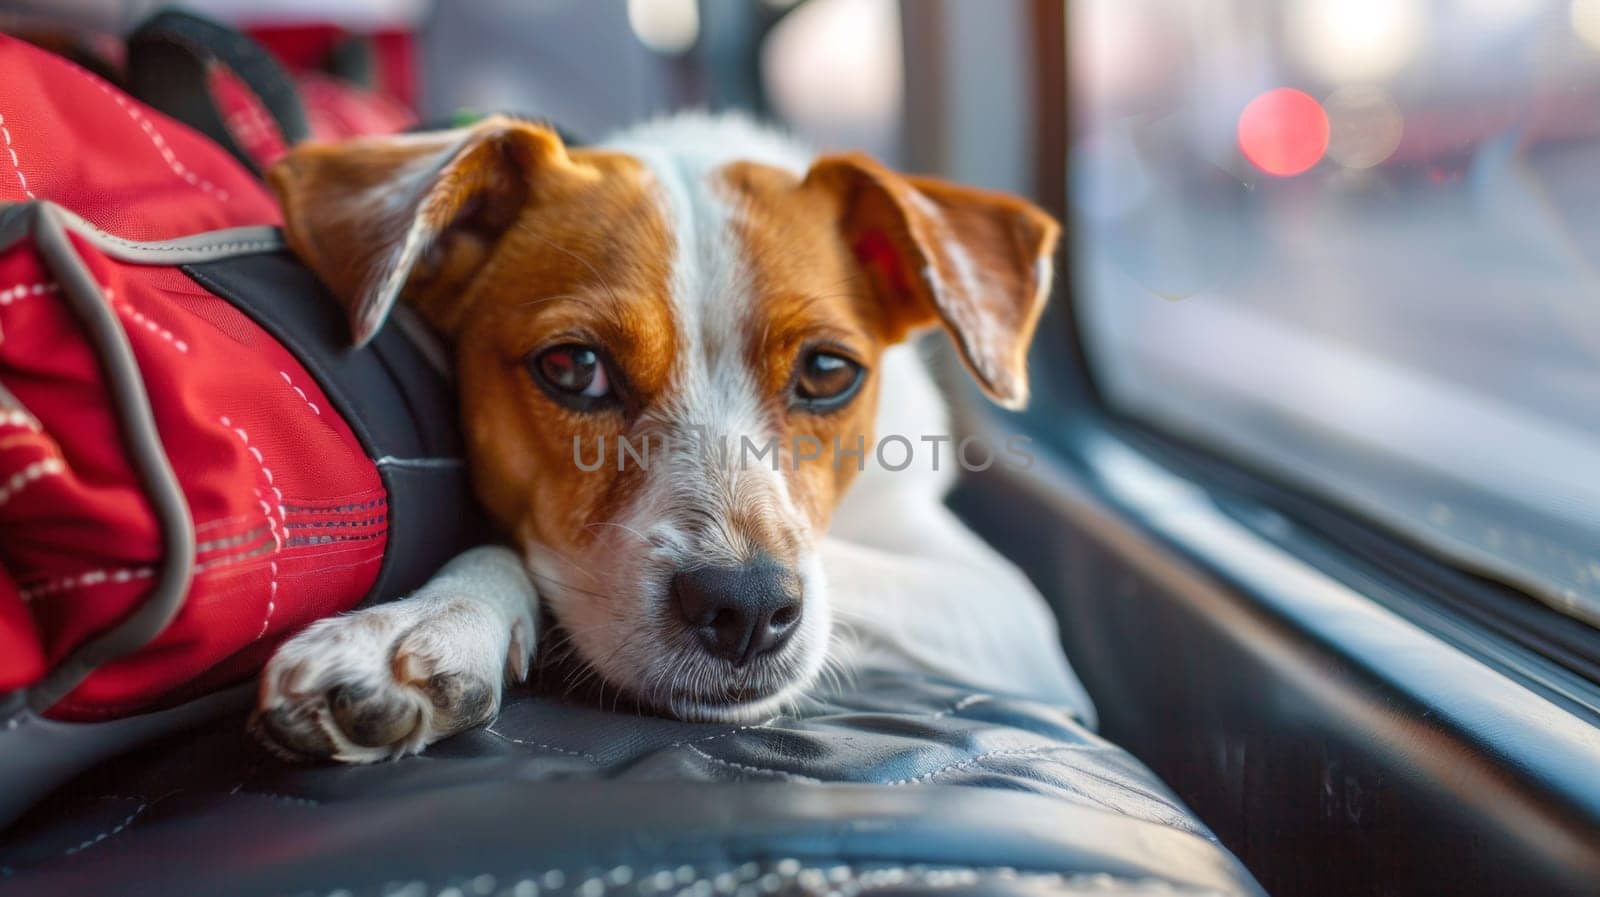 A dog laying on a seat with his head resting against the window, AI by starush